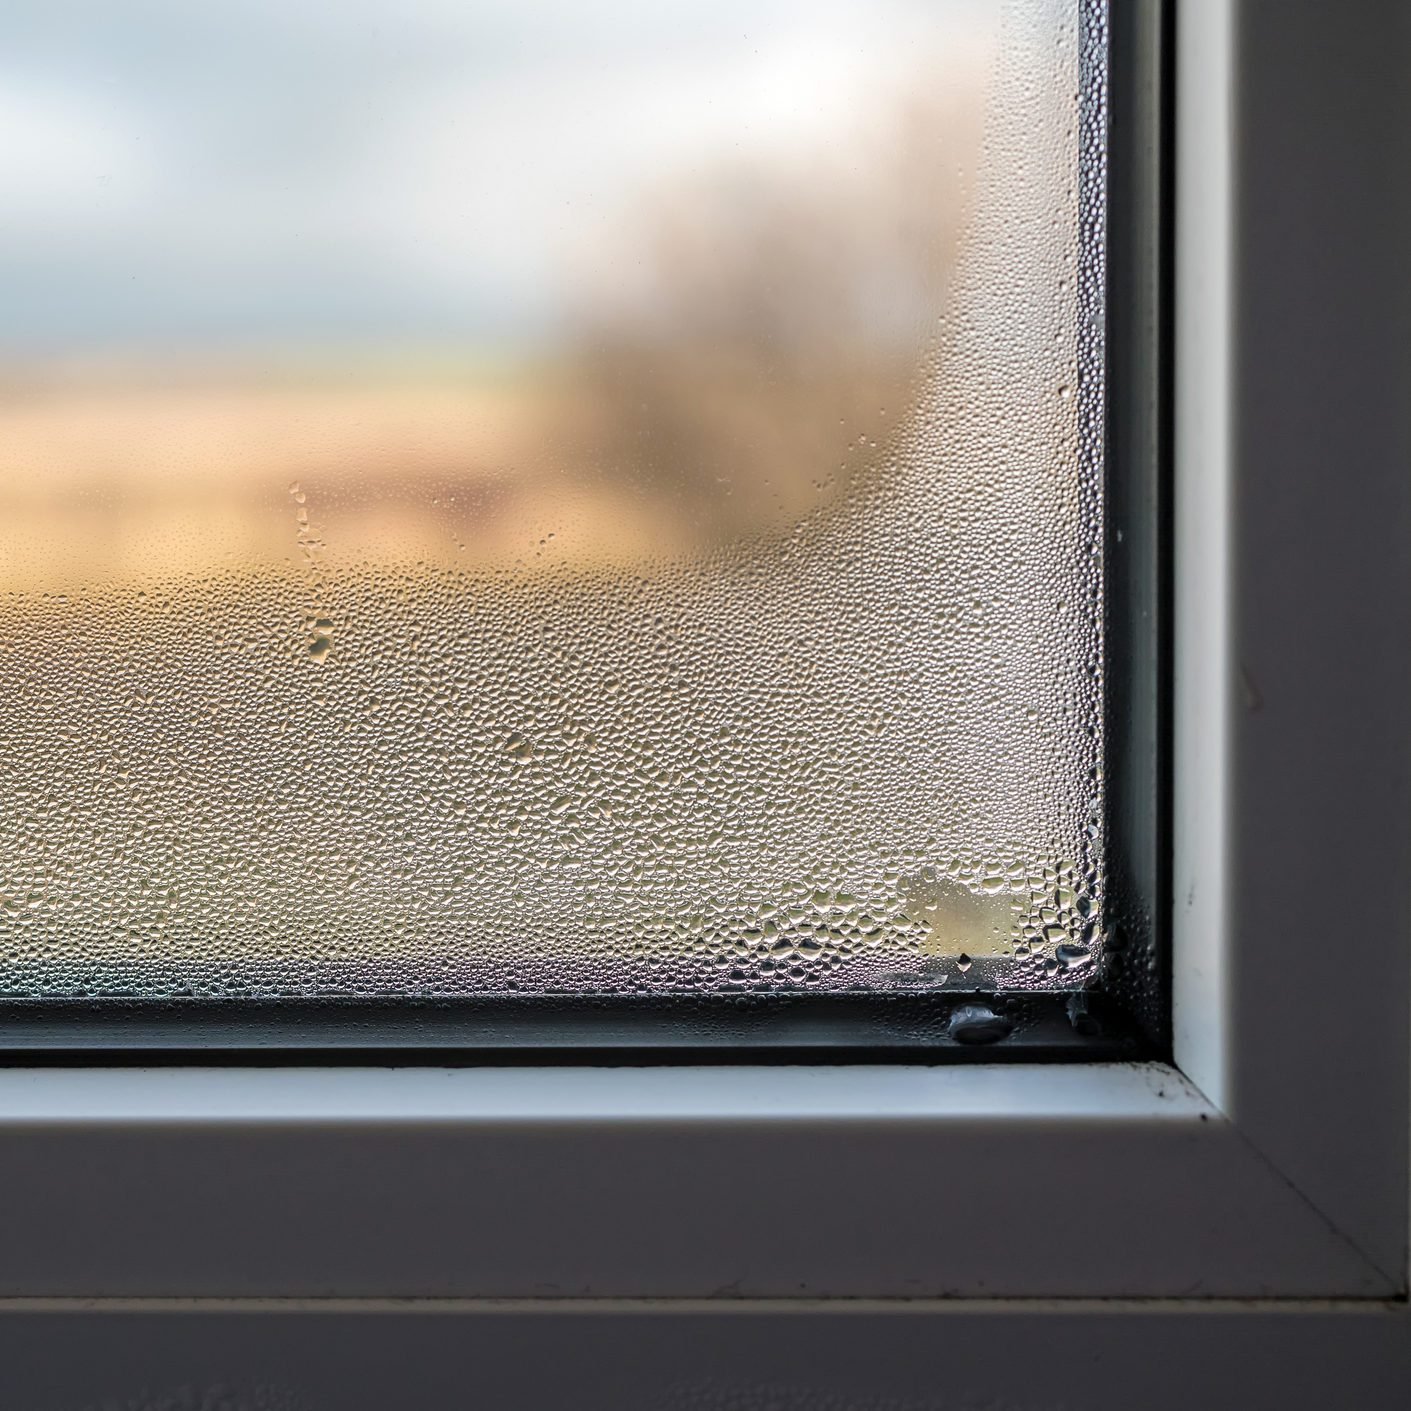 Mold formation through fogged window pane due to poor ventilation of the room